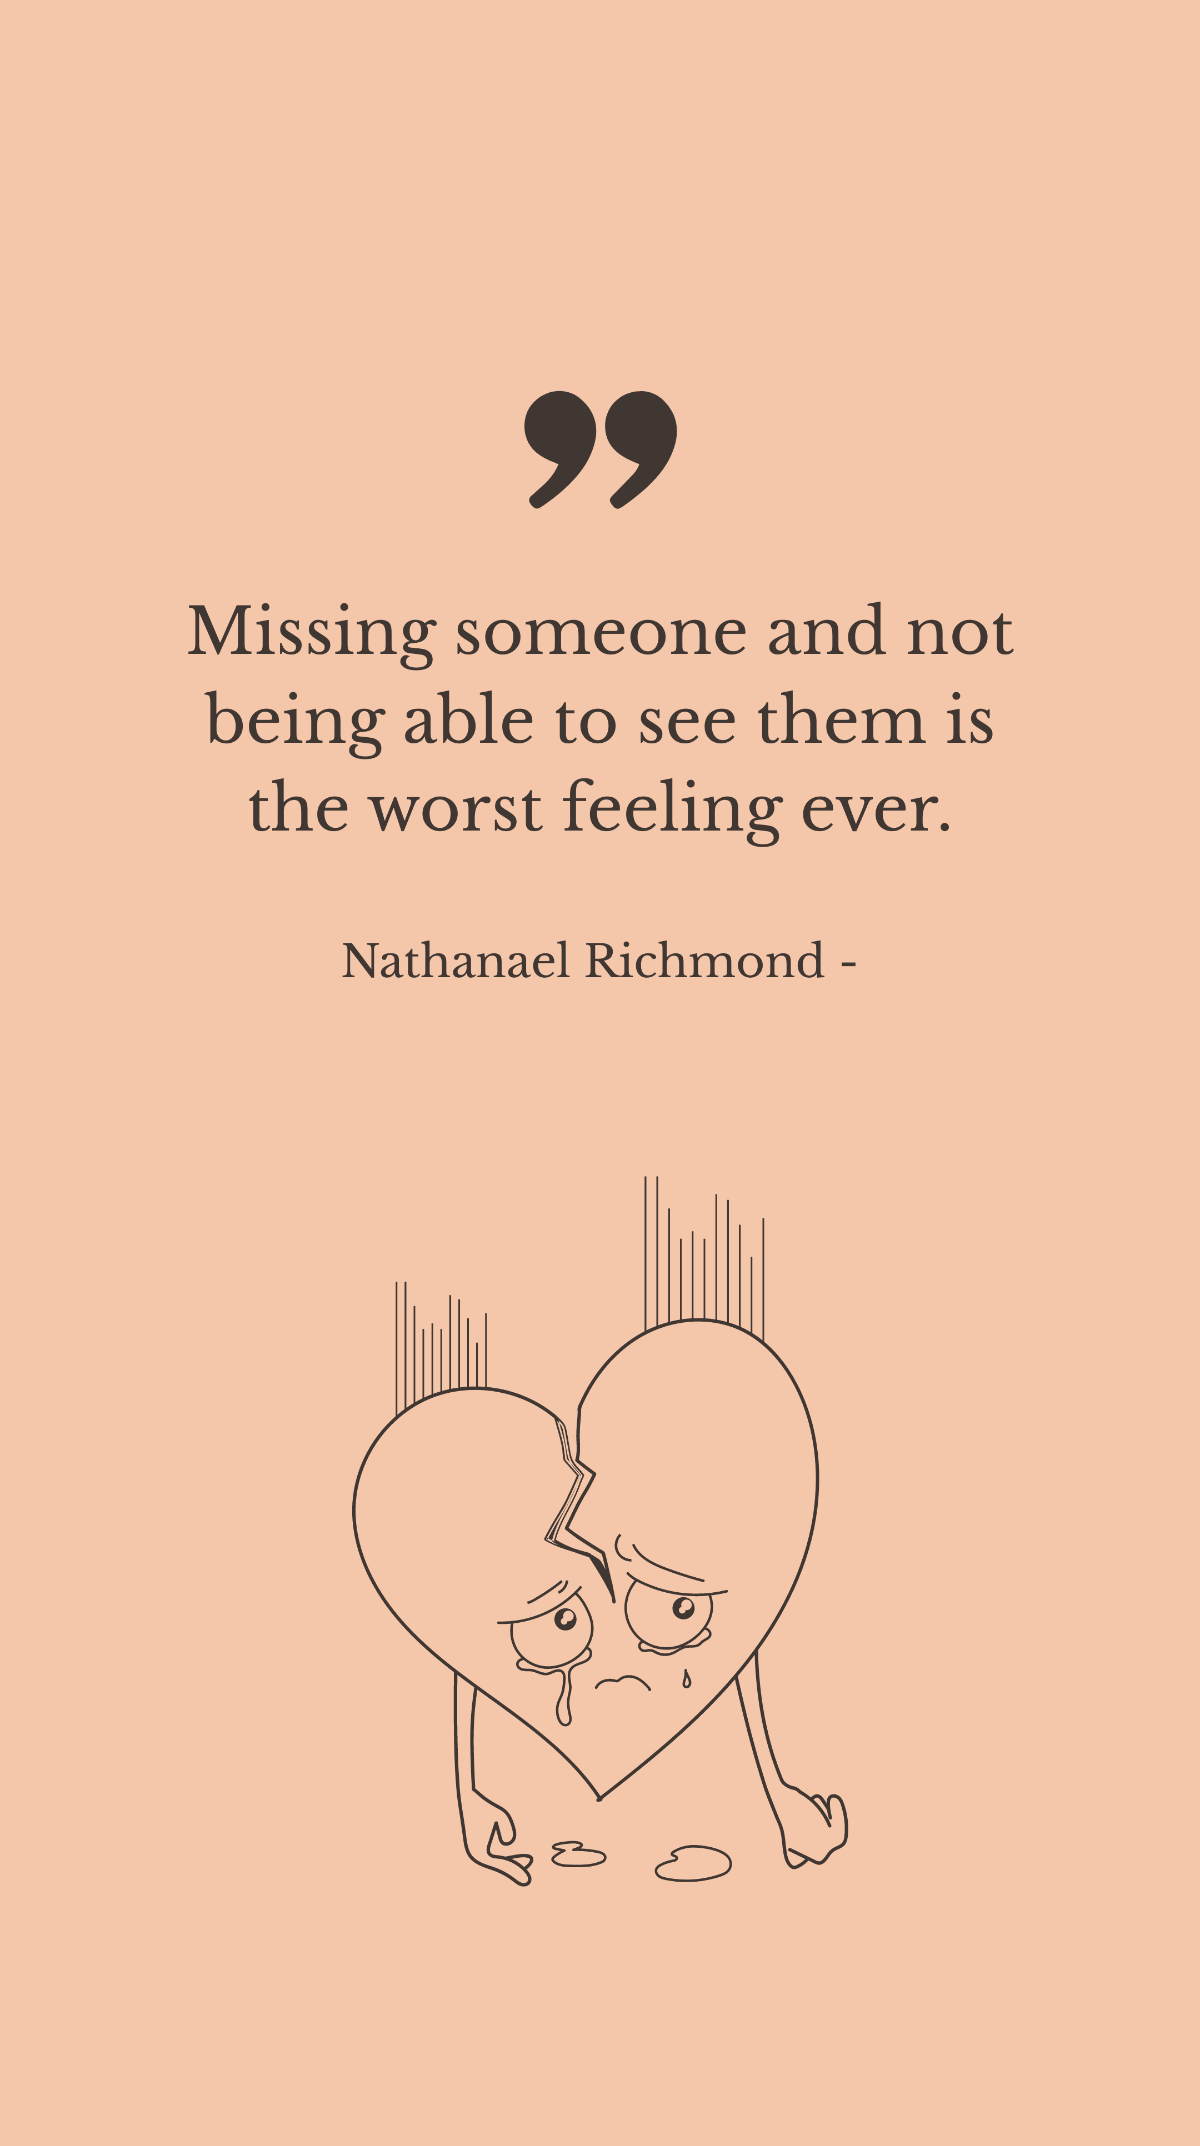 Nathanael Richmond - Missing someone and not being able to see them is the worst feeling ever.